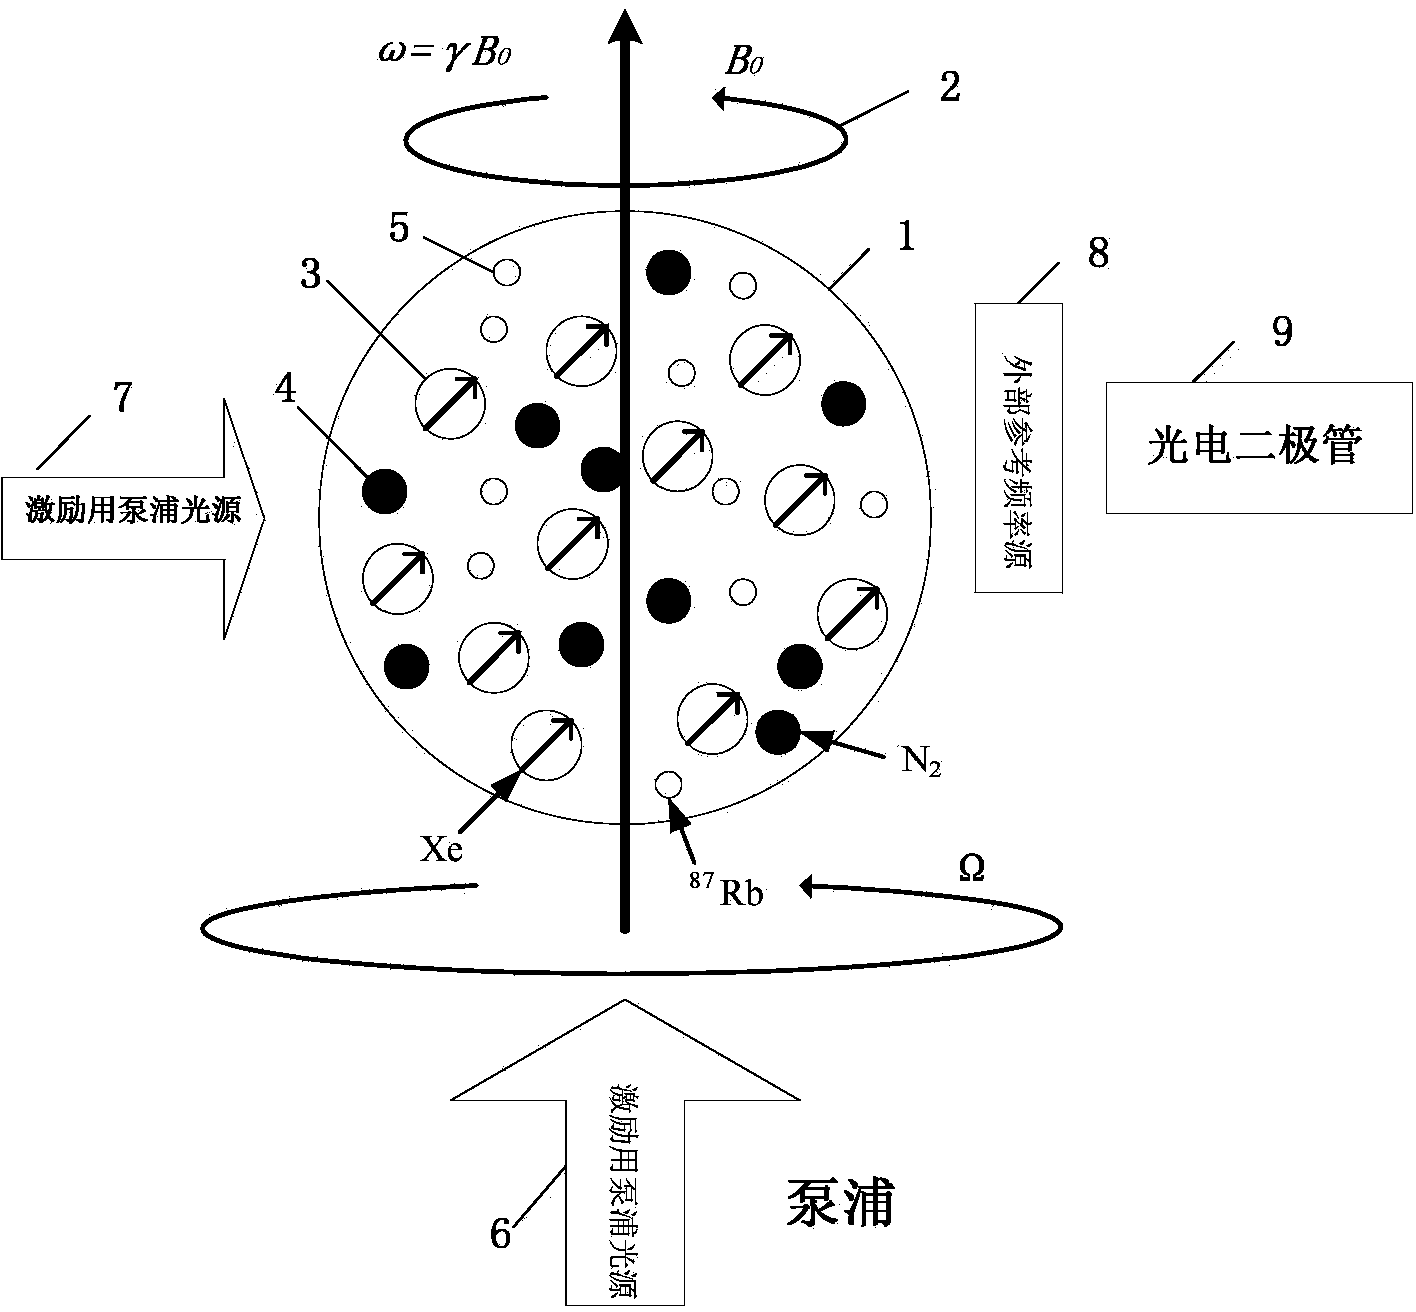 Method for measuring rotating angle of aircraft based on nuclear magnetic resonance